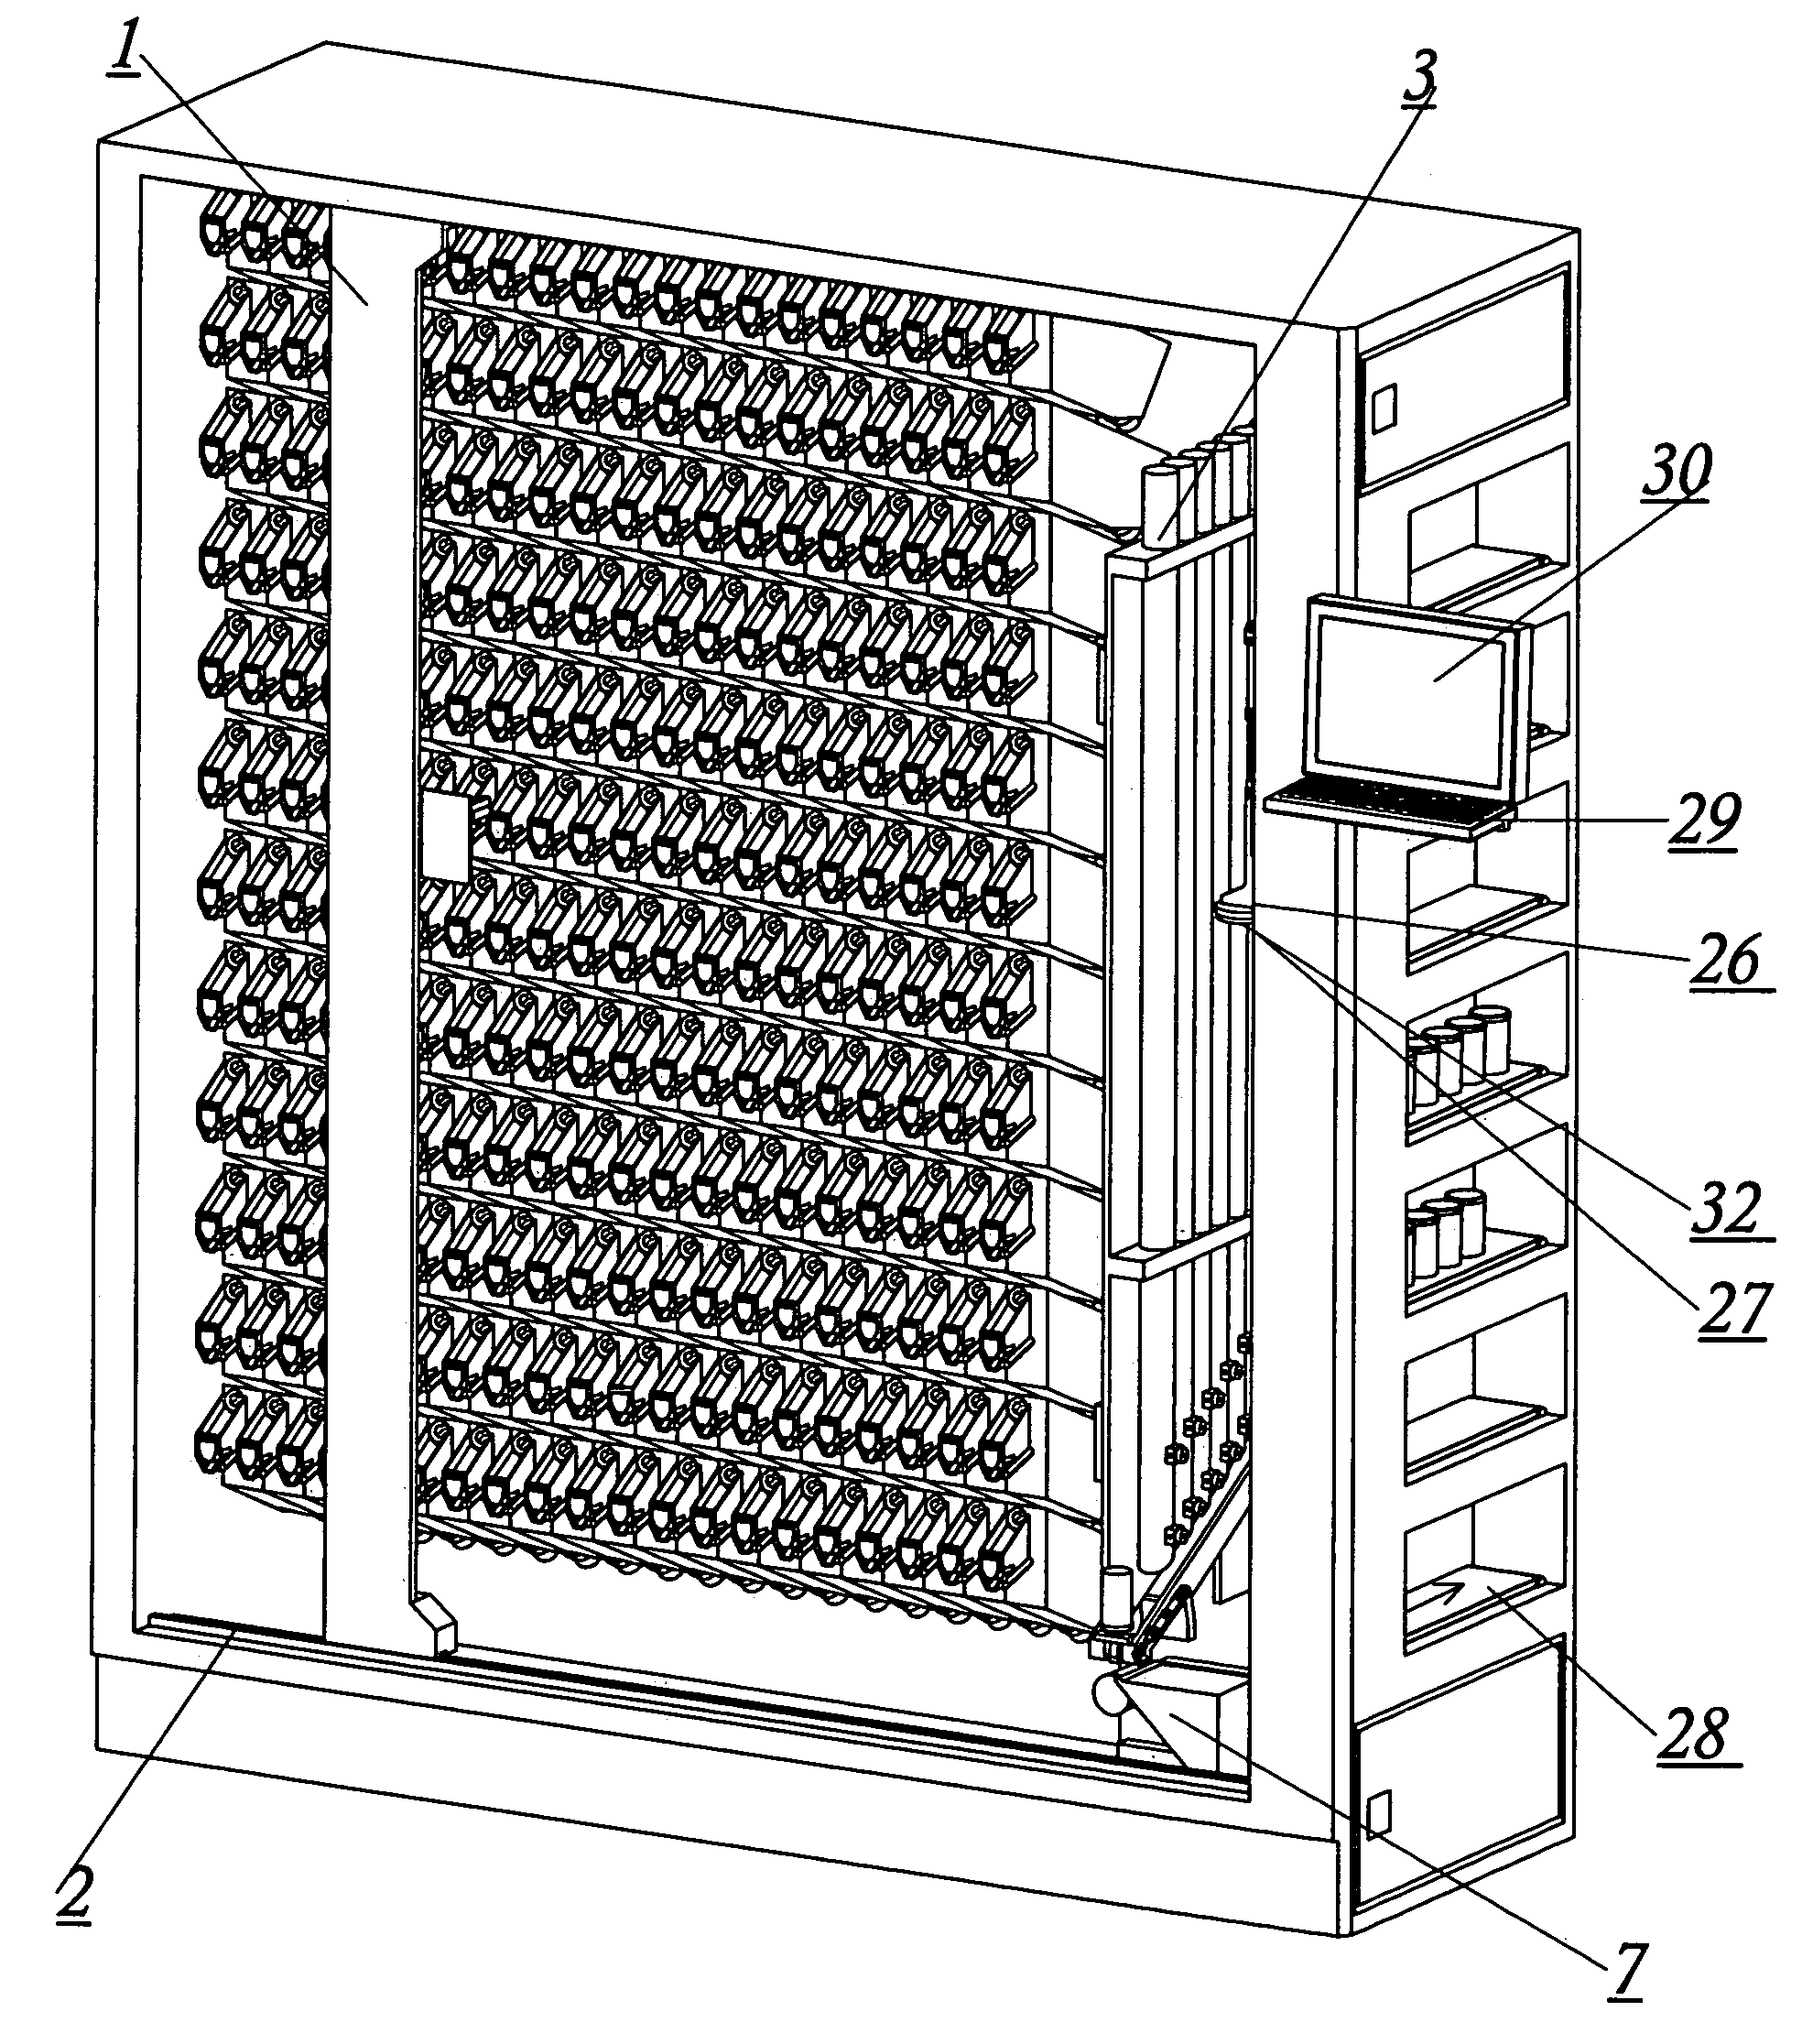 Pharmaceutical dispensing system for medicament and pre-packaged medication